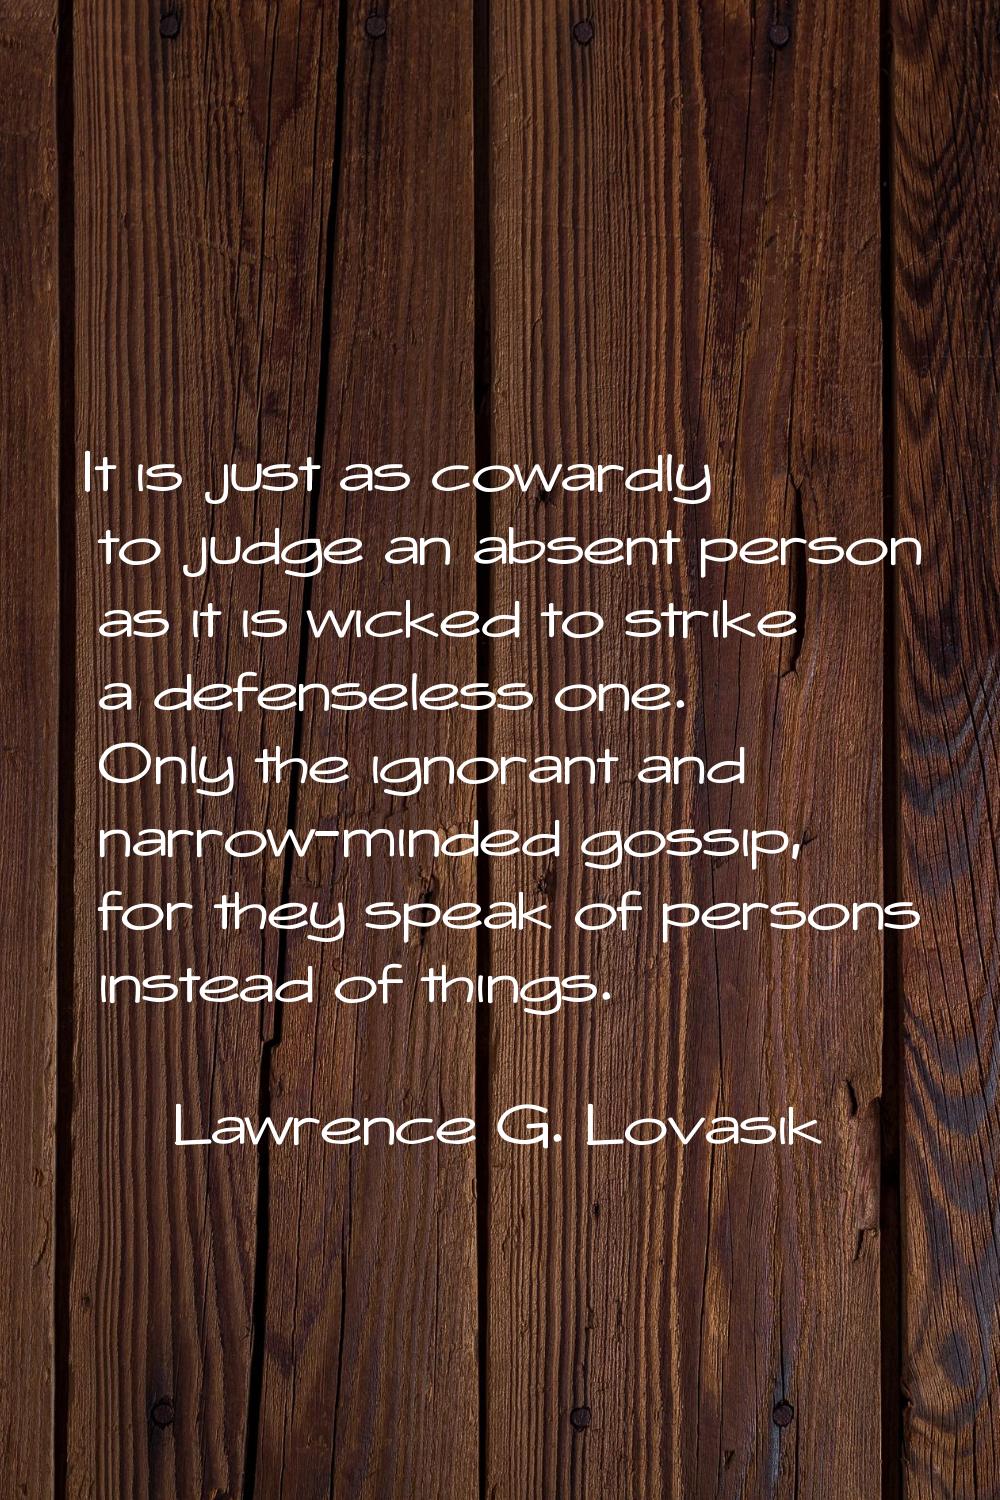 It is just as cowardly to judge an absent person as it is wicked to strike a defenseless one. Only 